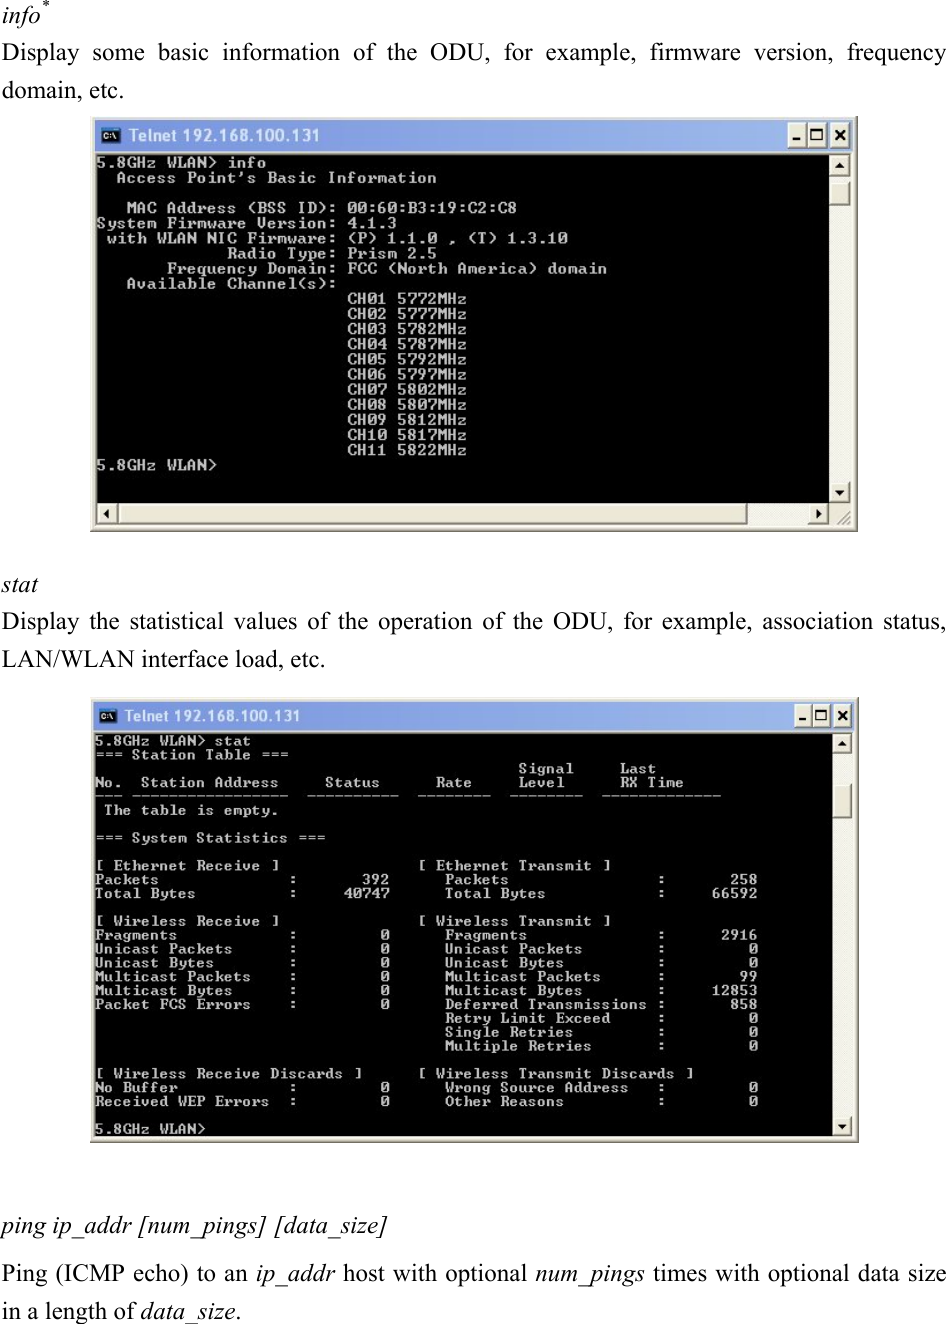 info* Display some basic information of the ODU, for example, firmware version, frequency domain, etc.   stat   Display the statistical values of the operation of the ODU, for example, association status, LAN/WLAN interface load, etc.    ping ip_addr [num_pings] [data_size] Ping (ICMP echo) to an ip_addr host with optional num_pings times with optional data size in a length of data_size. 